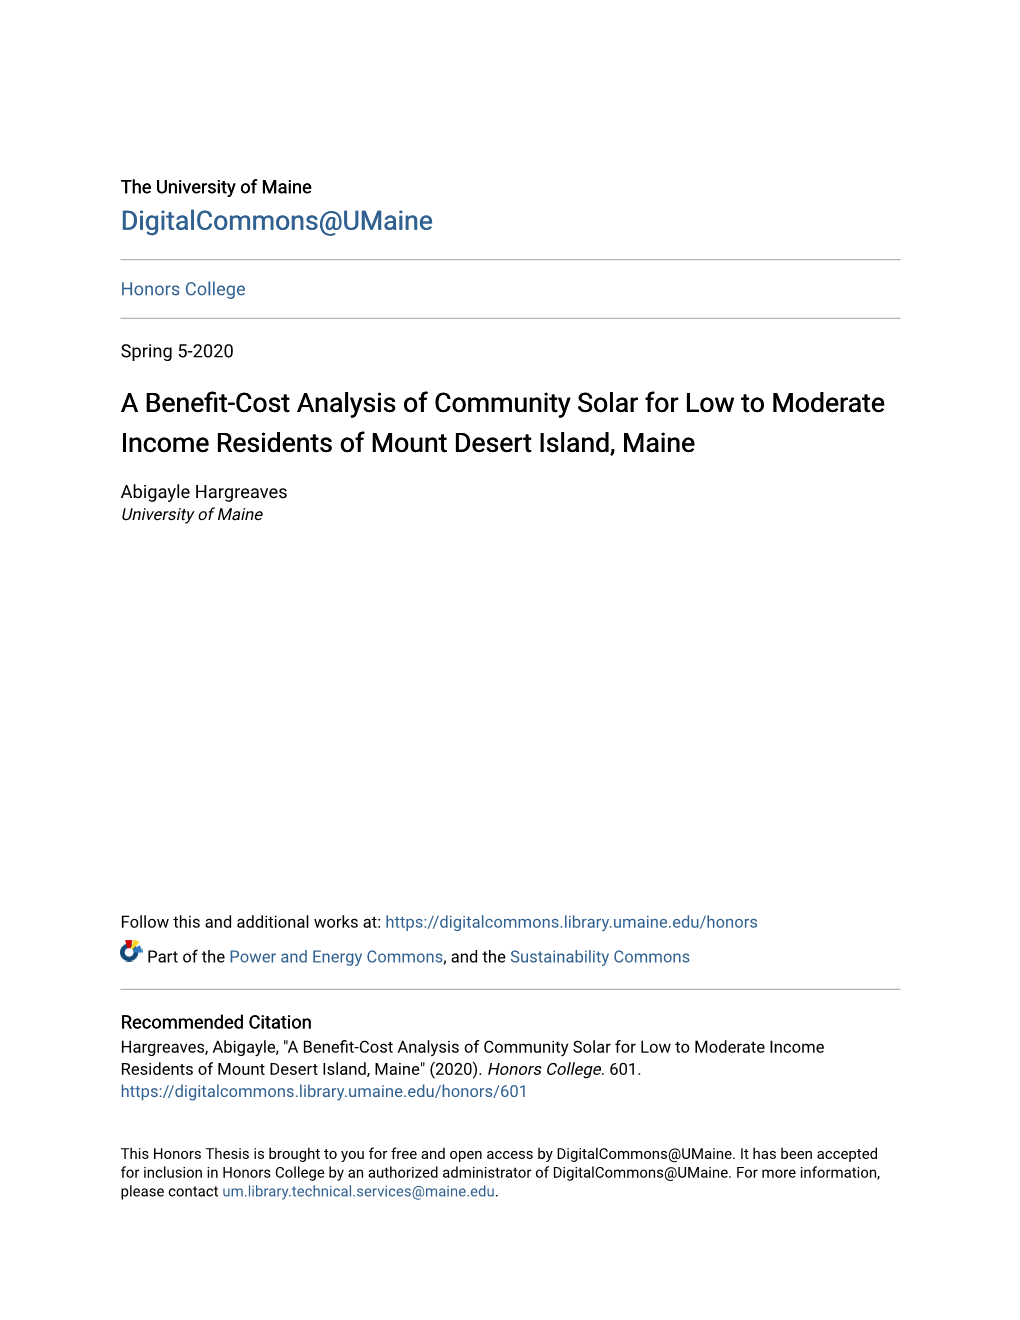 A Benefit-Cost Analysis of Community Solar for Low to Moderate Income